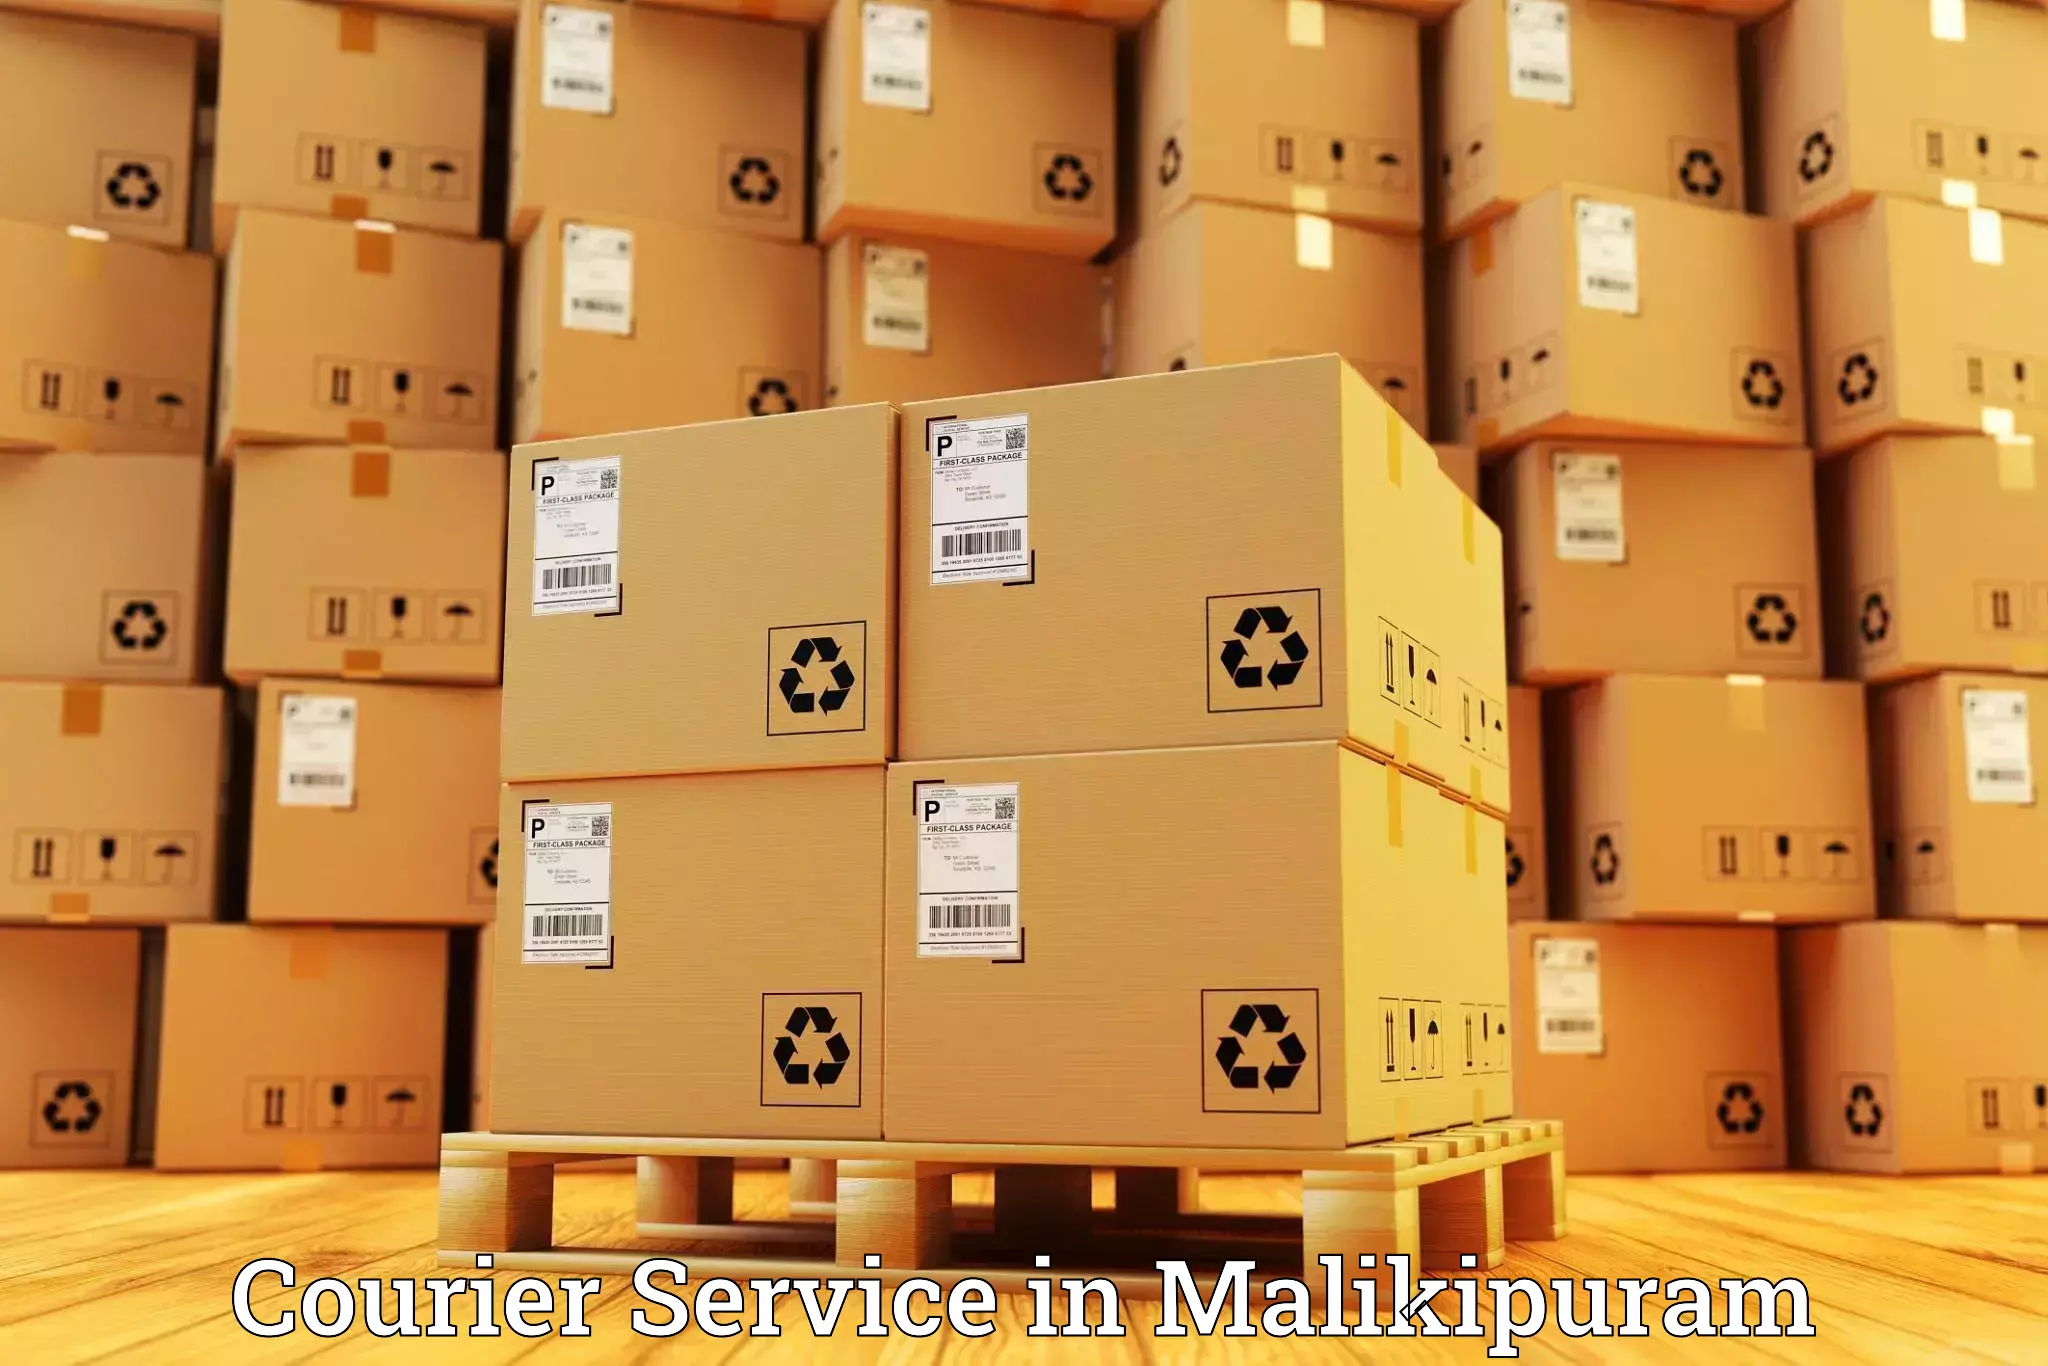 Next-day delivery options in Malikipuram